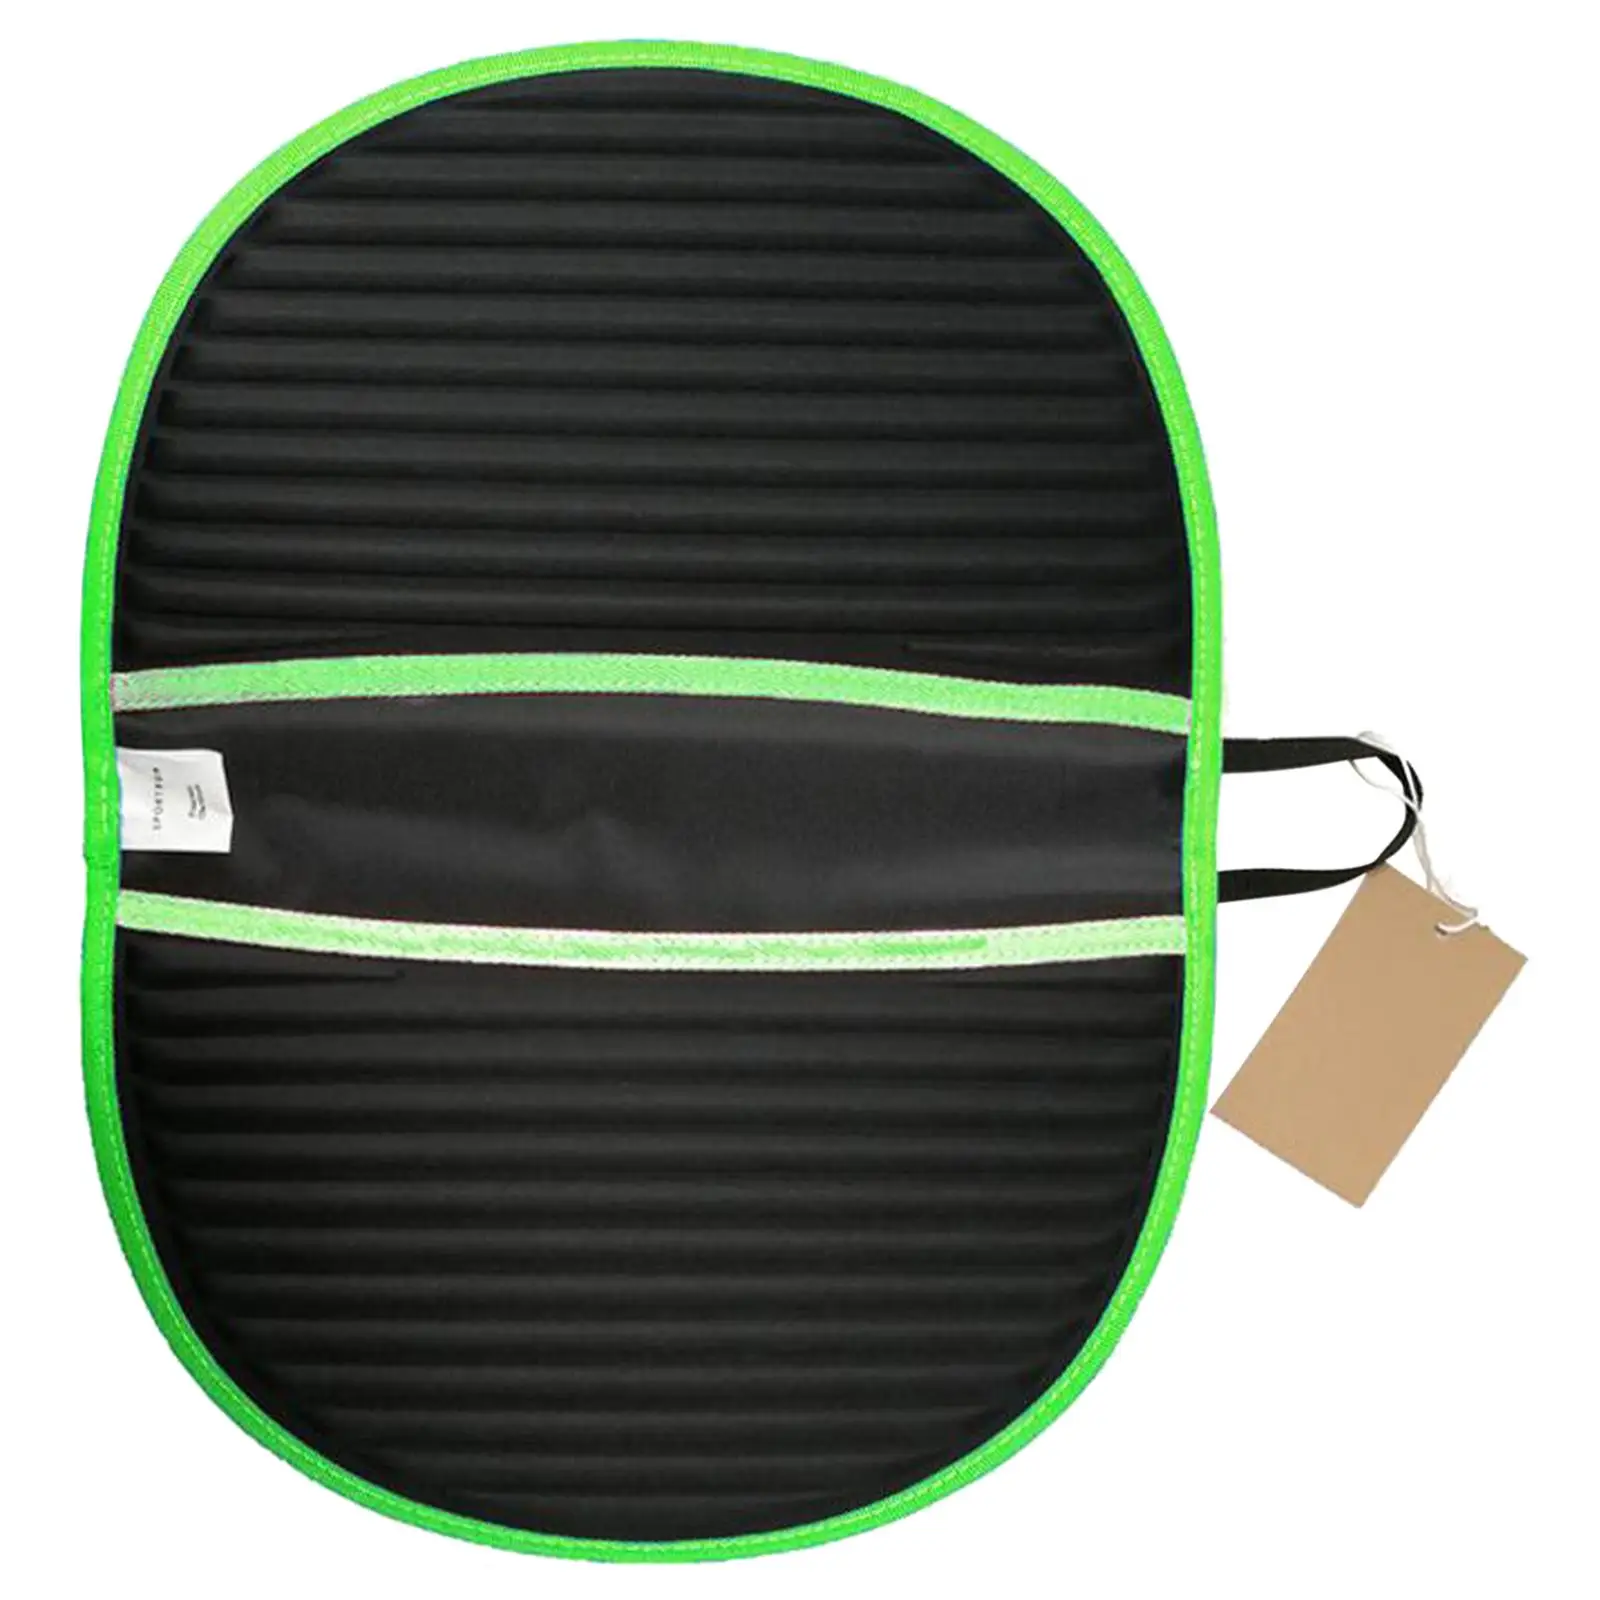 Waterproof Wetsuit Changing Mat Grounding Mat Feet Pad Foldable for Surfers